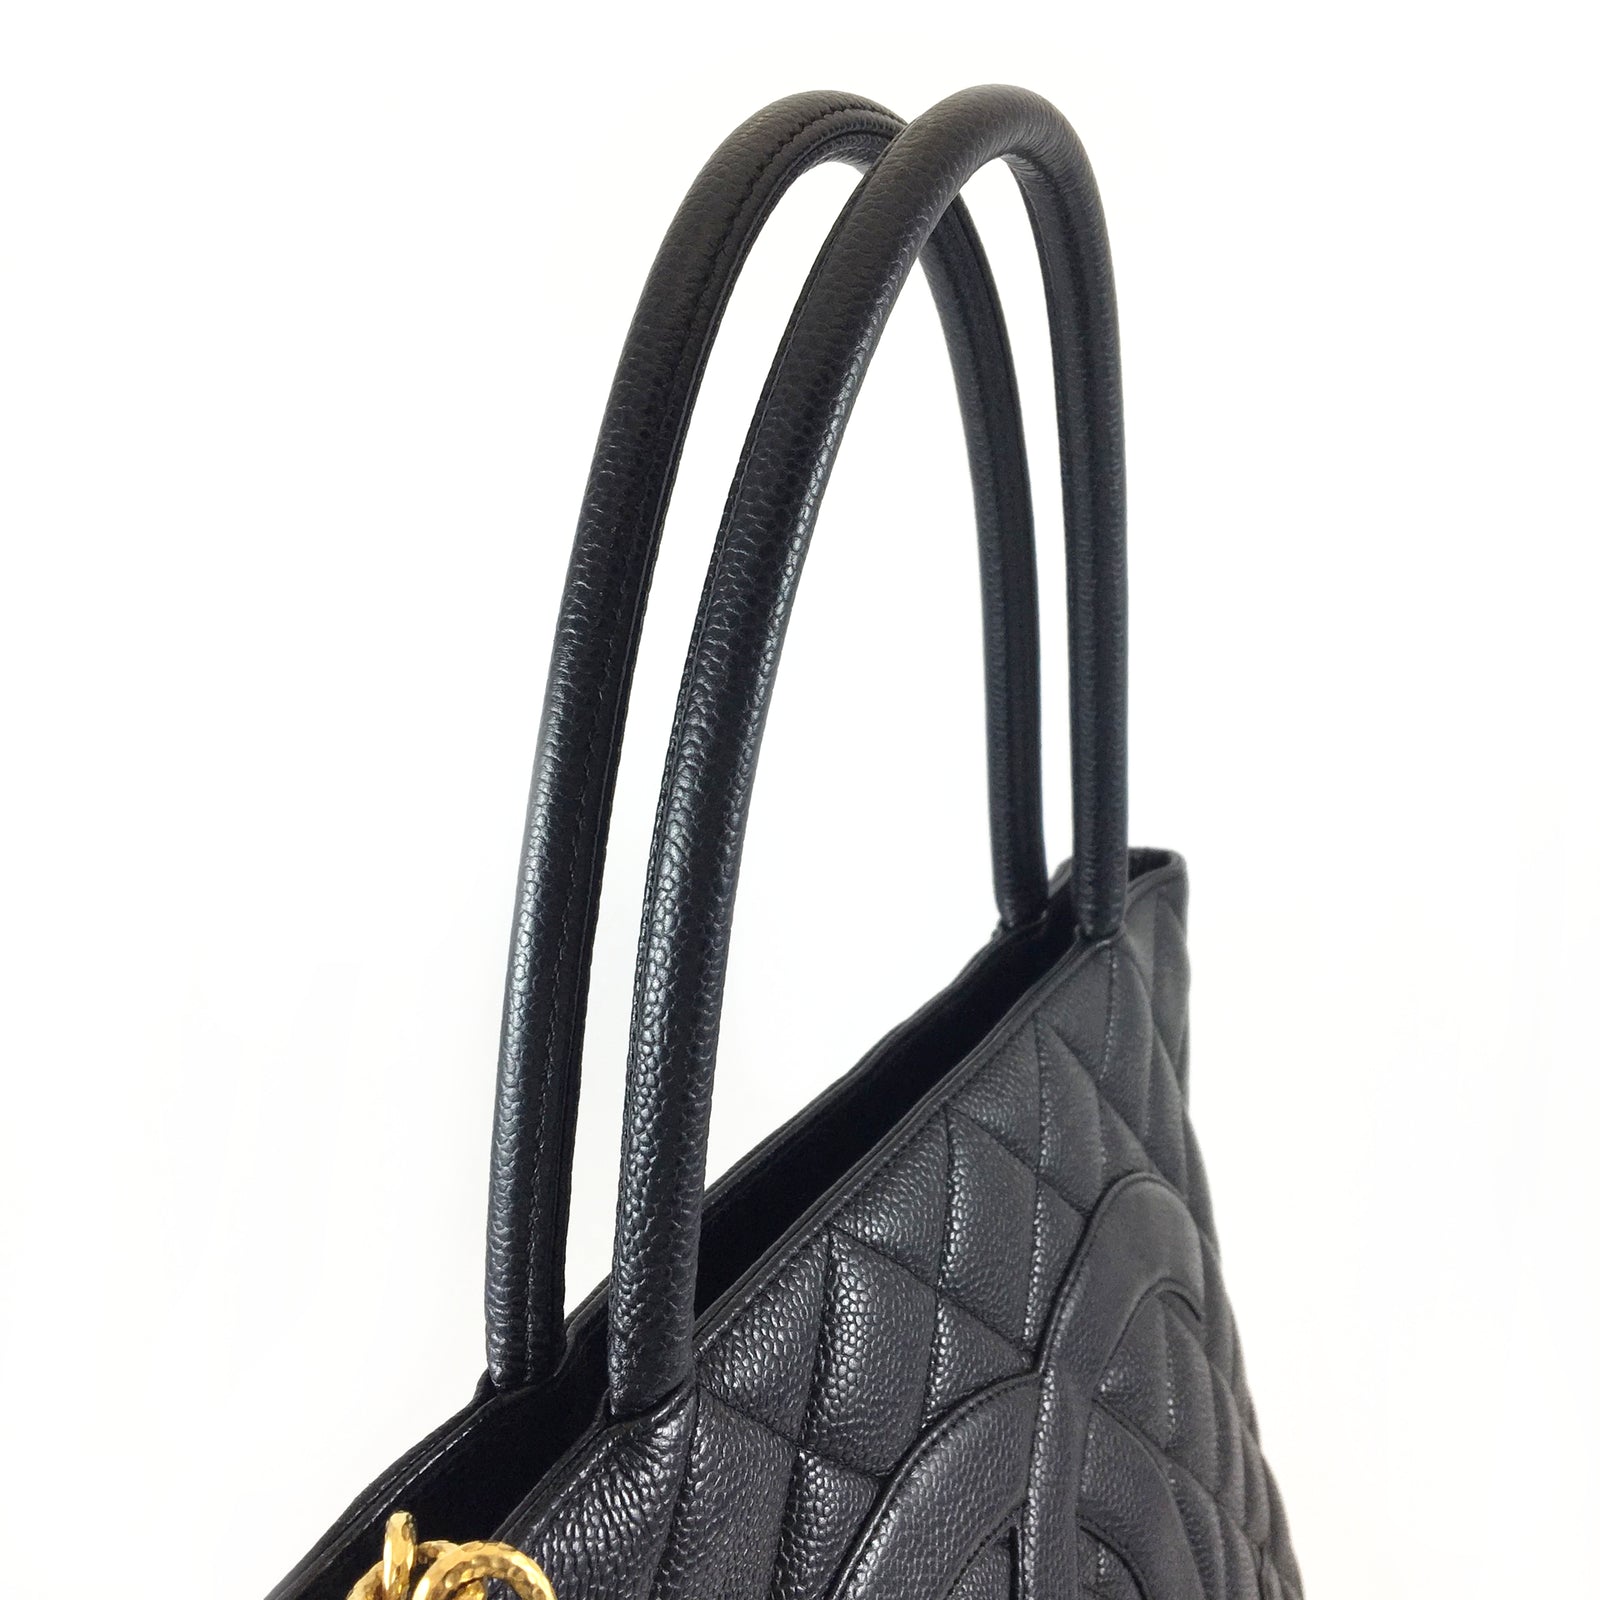 Caviar Quilted Medallion Tote